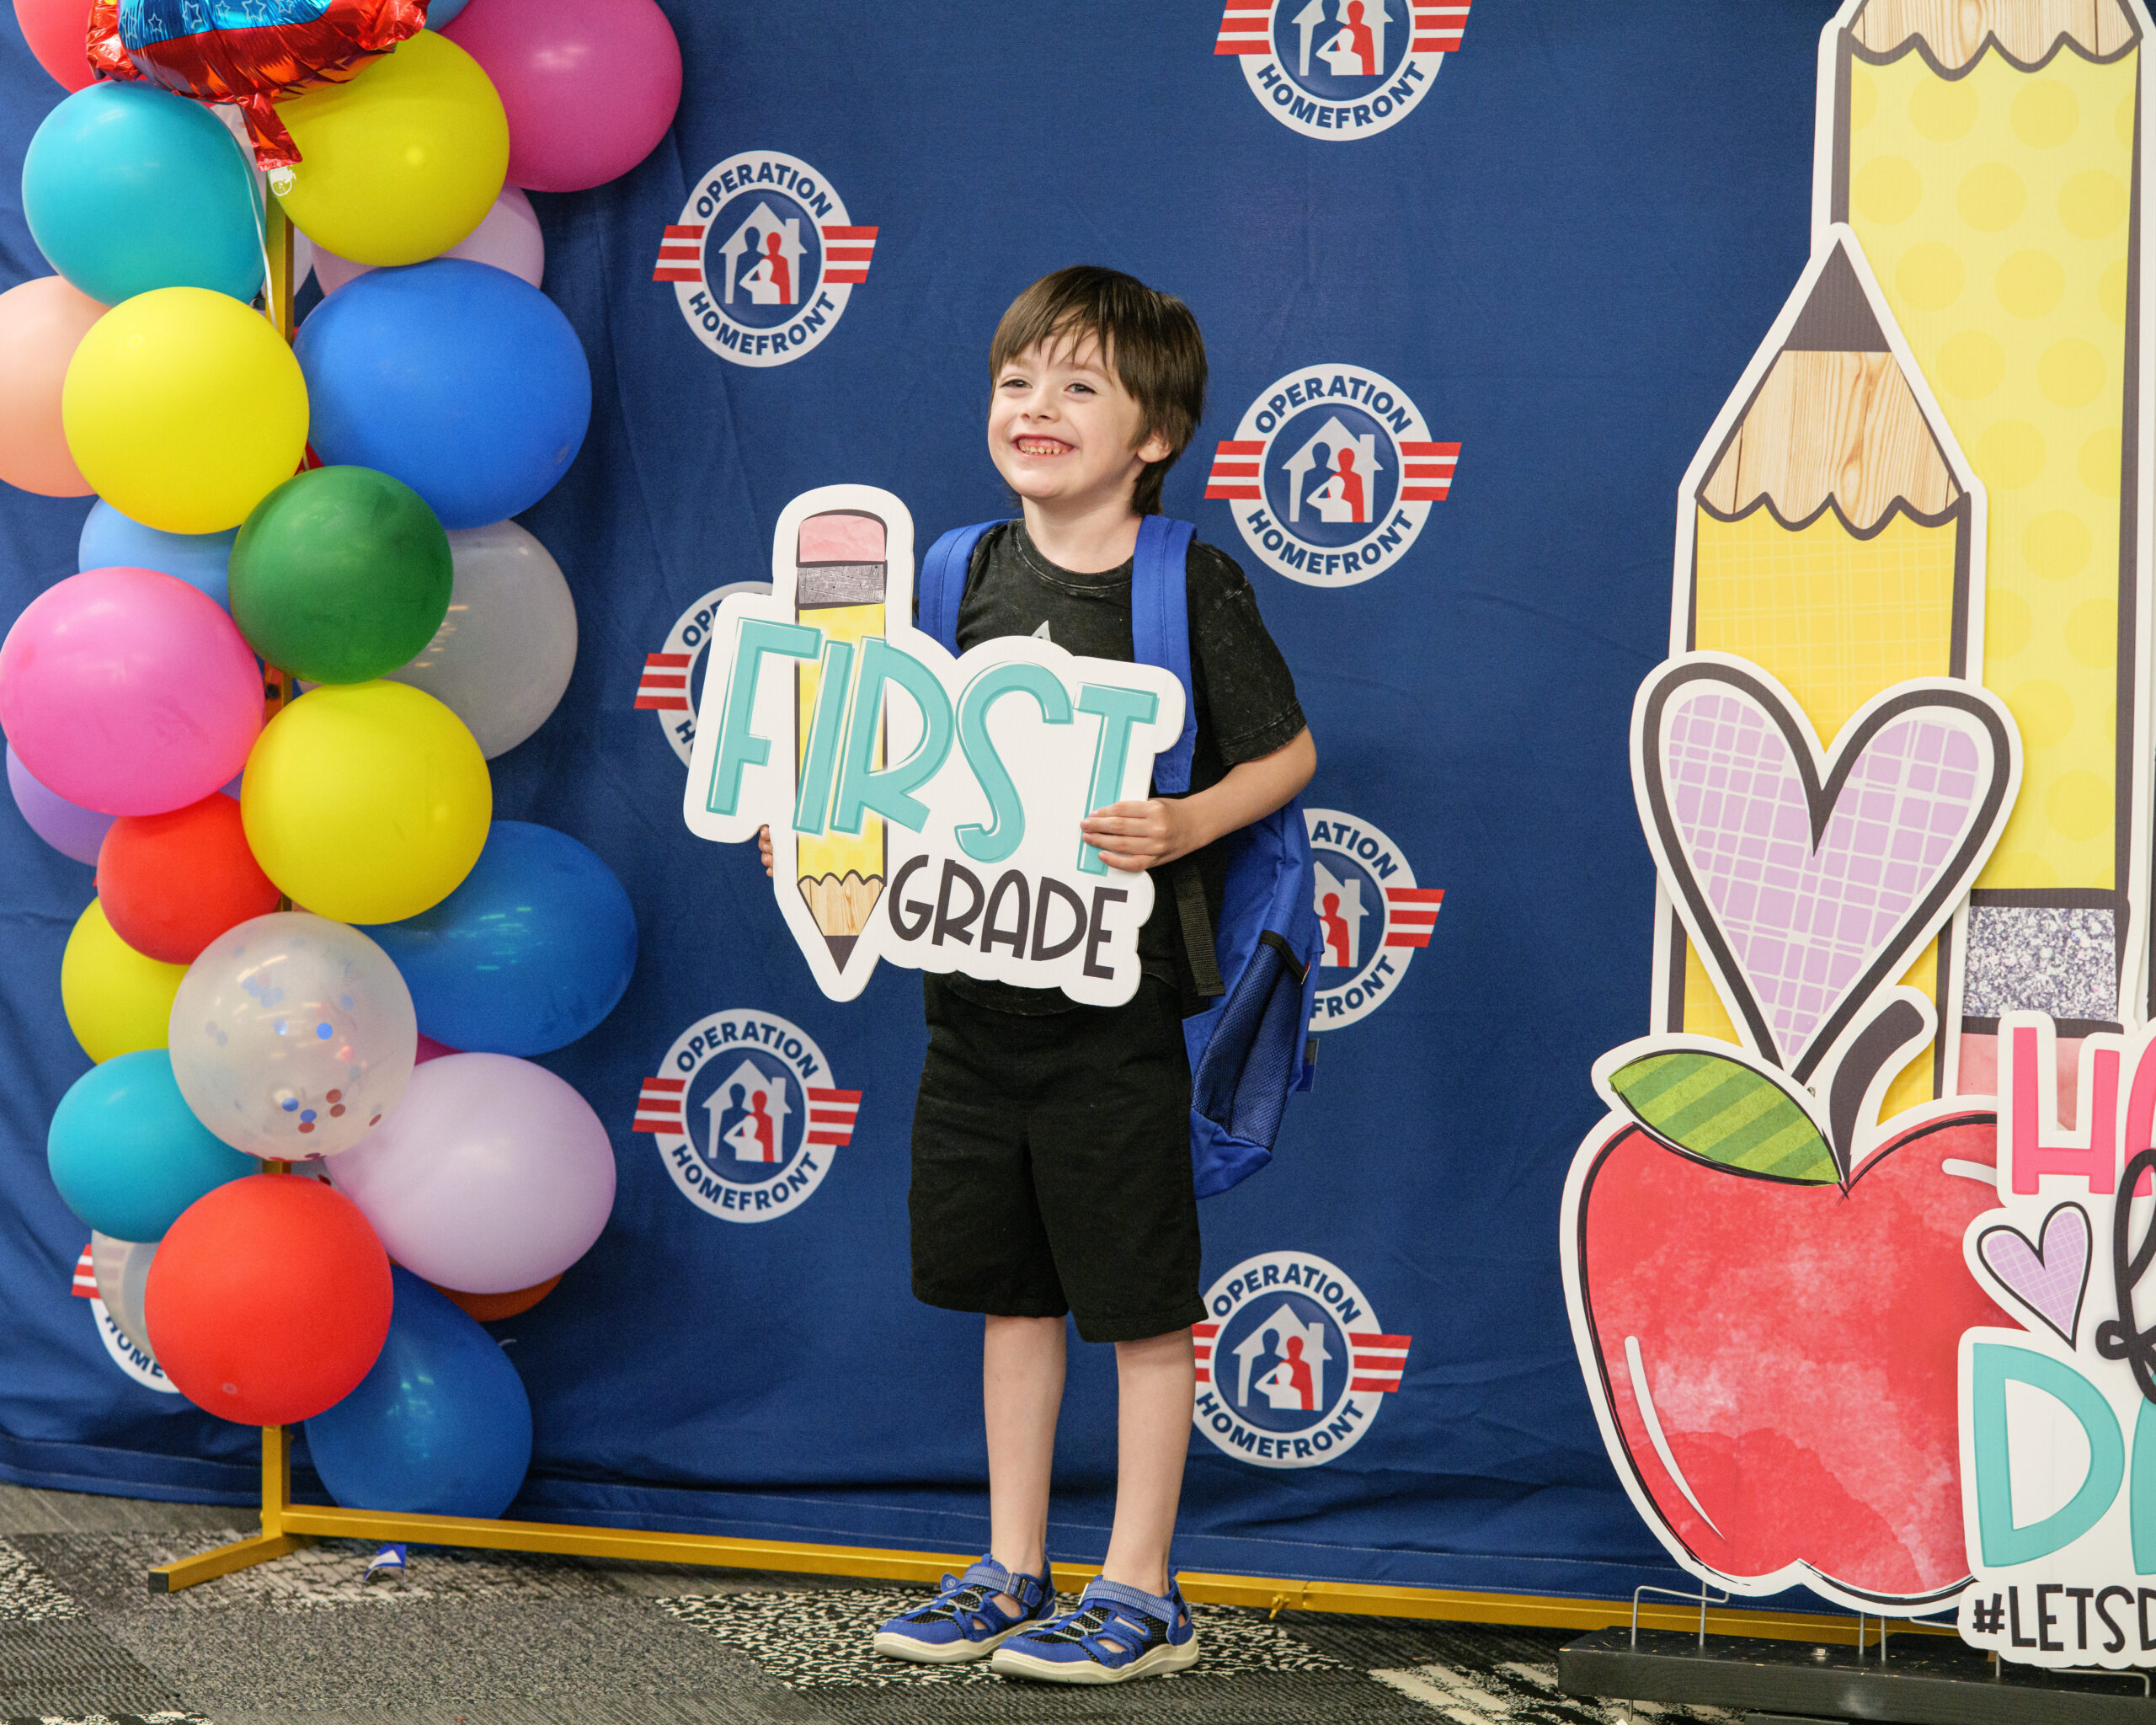 boy holding a first grade sign for a photo